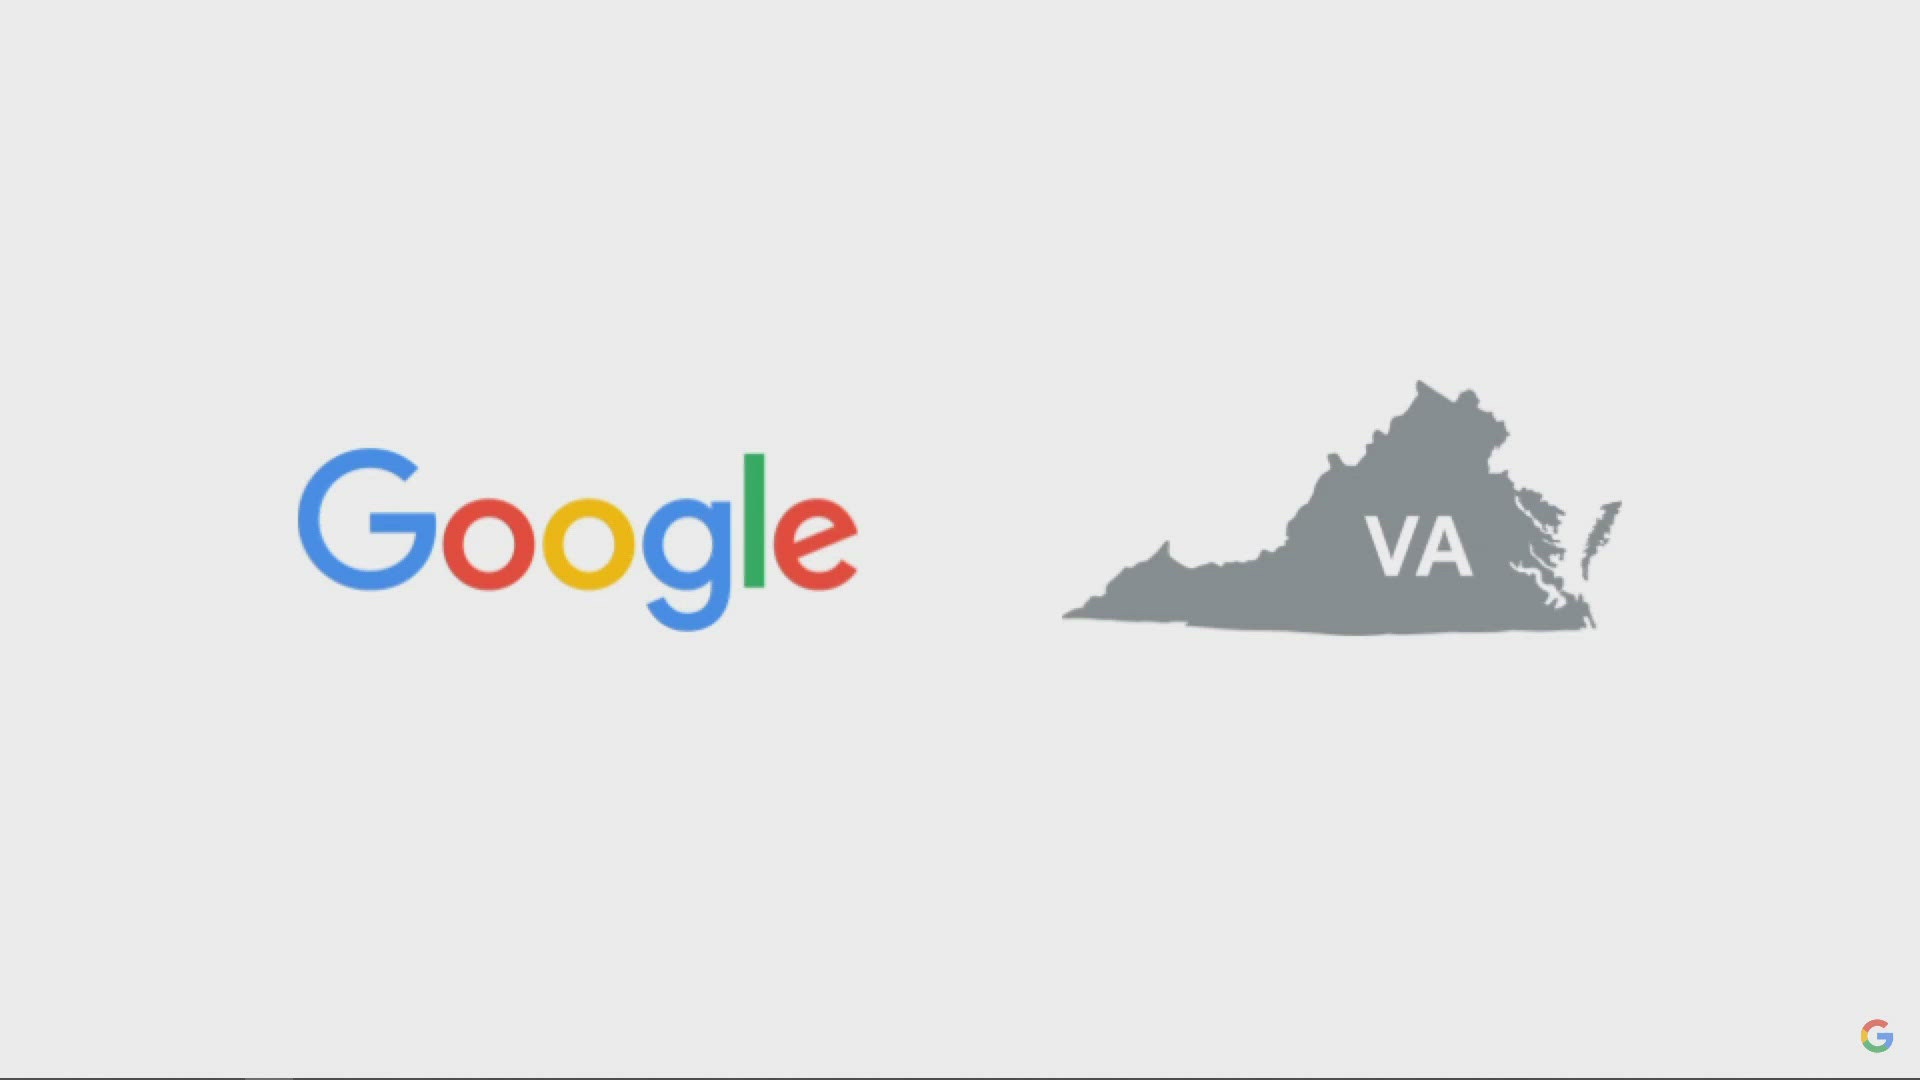 Google has announced it's spending 1 BILLION dollars to expand its existing data centers in Loudoun and Prince William counties.